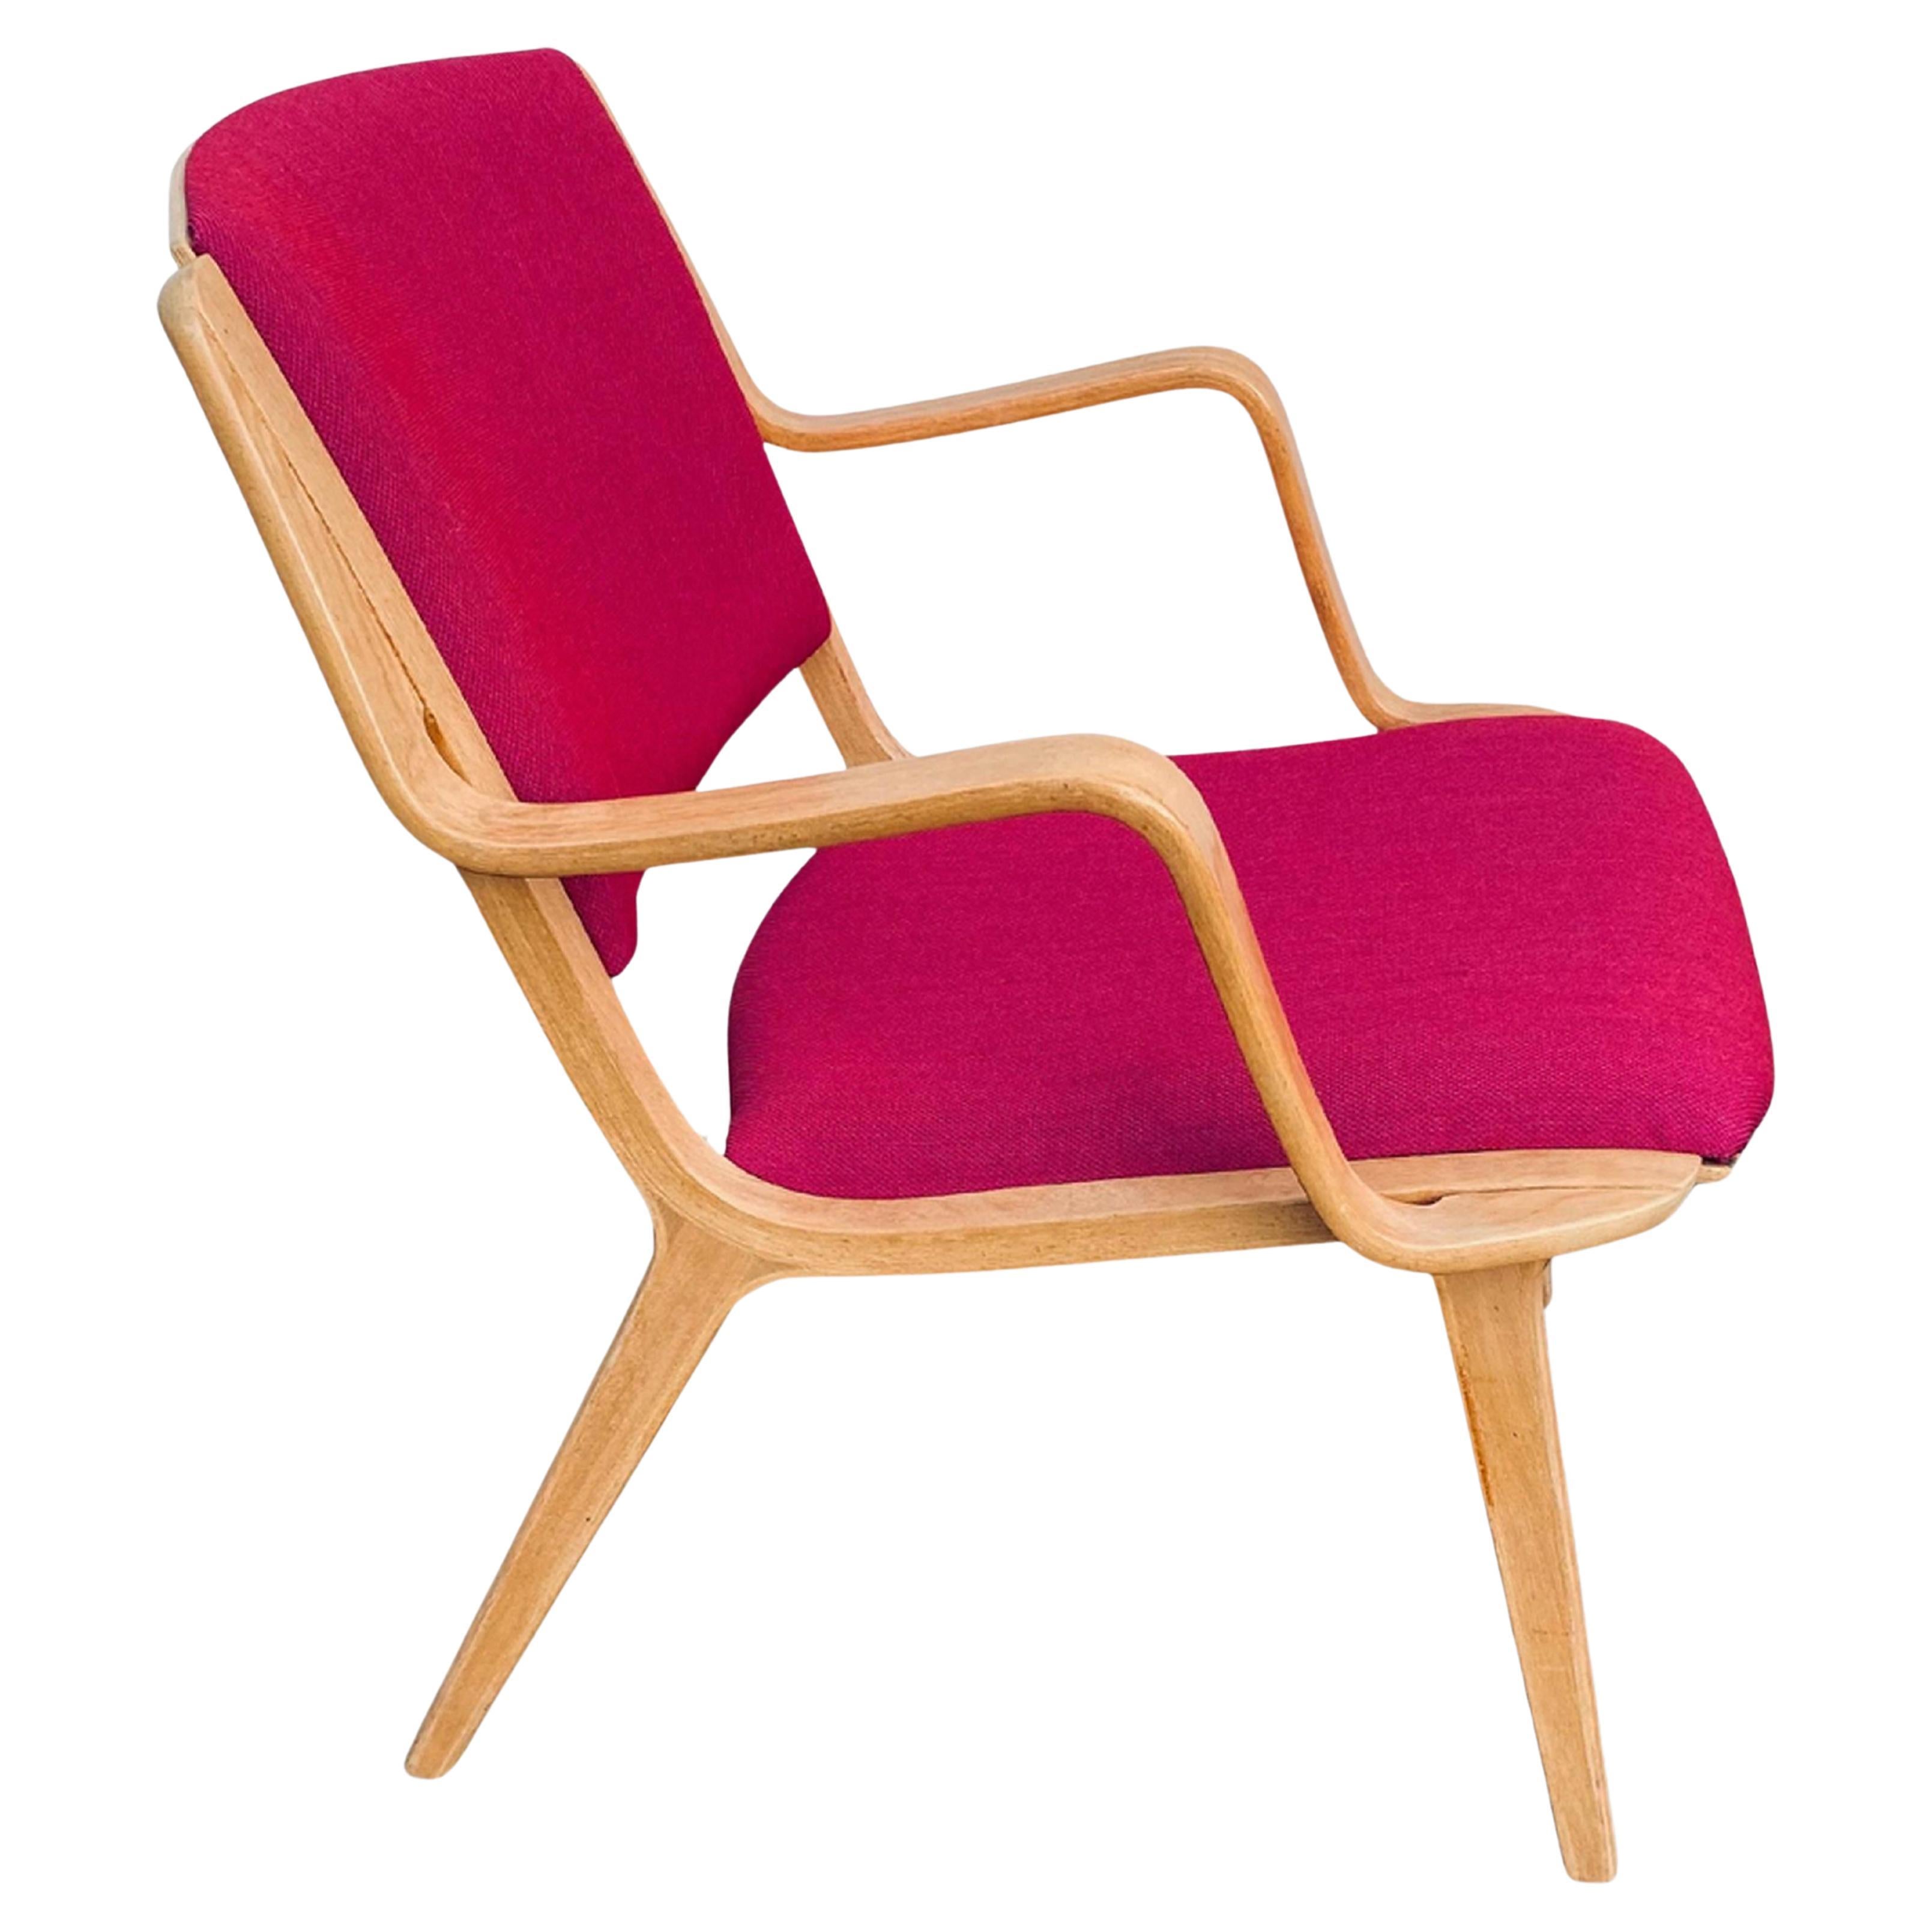 "AX" Lounge chair by Danish designers Peter Hvidt & Orla Mølgaard  For Sale